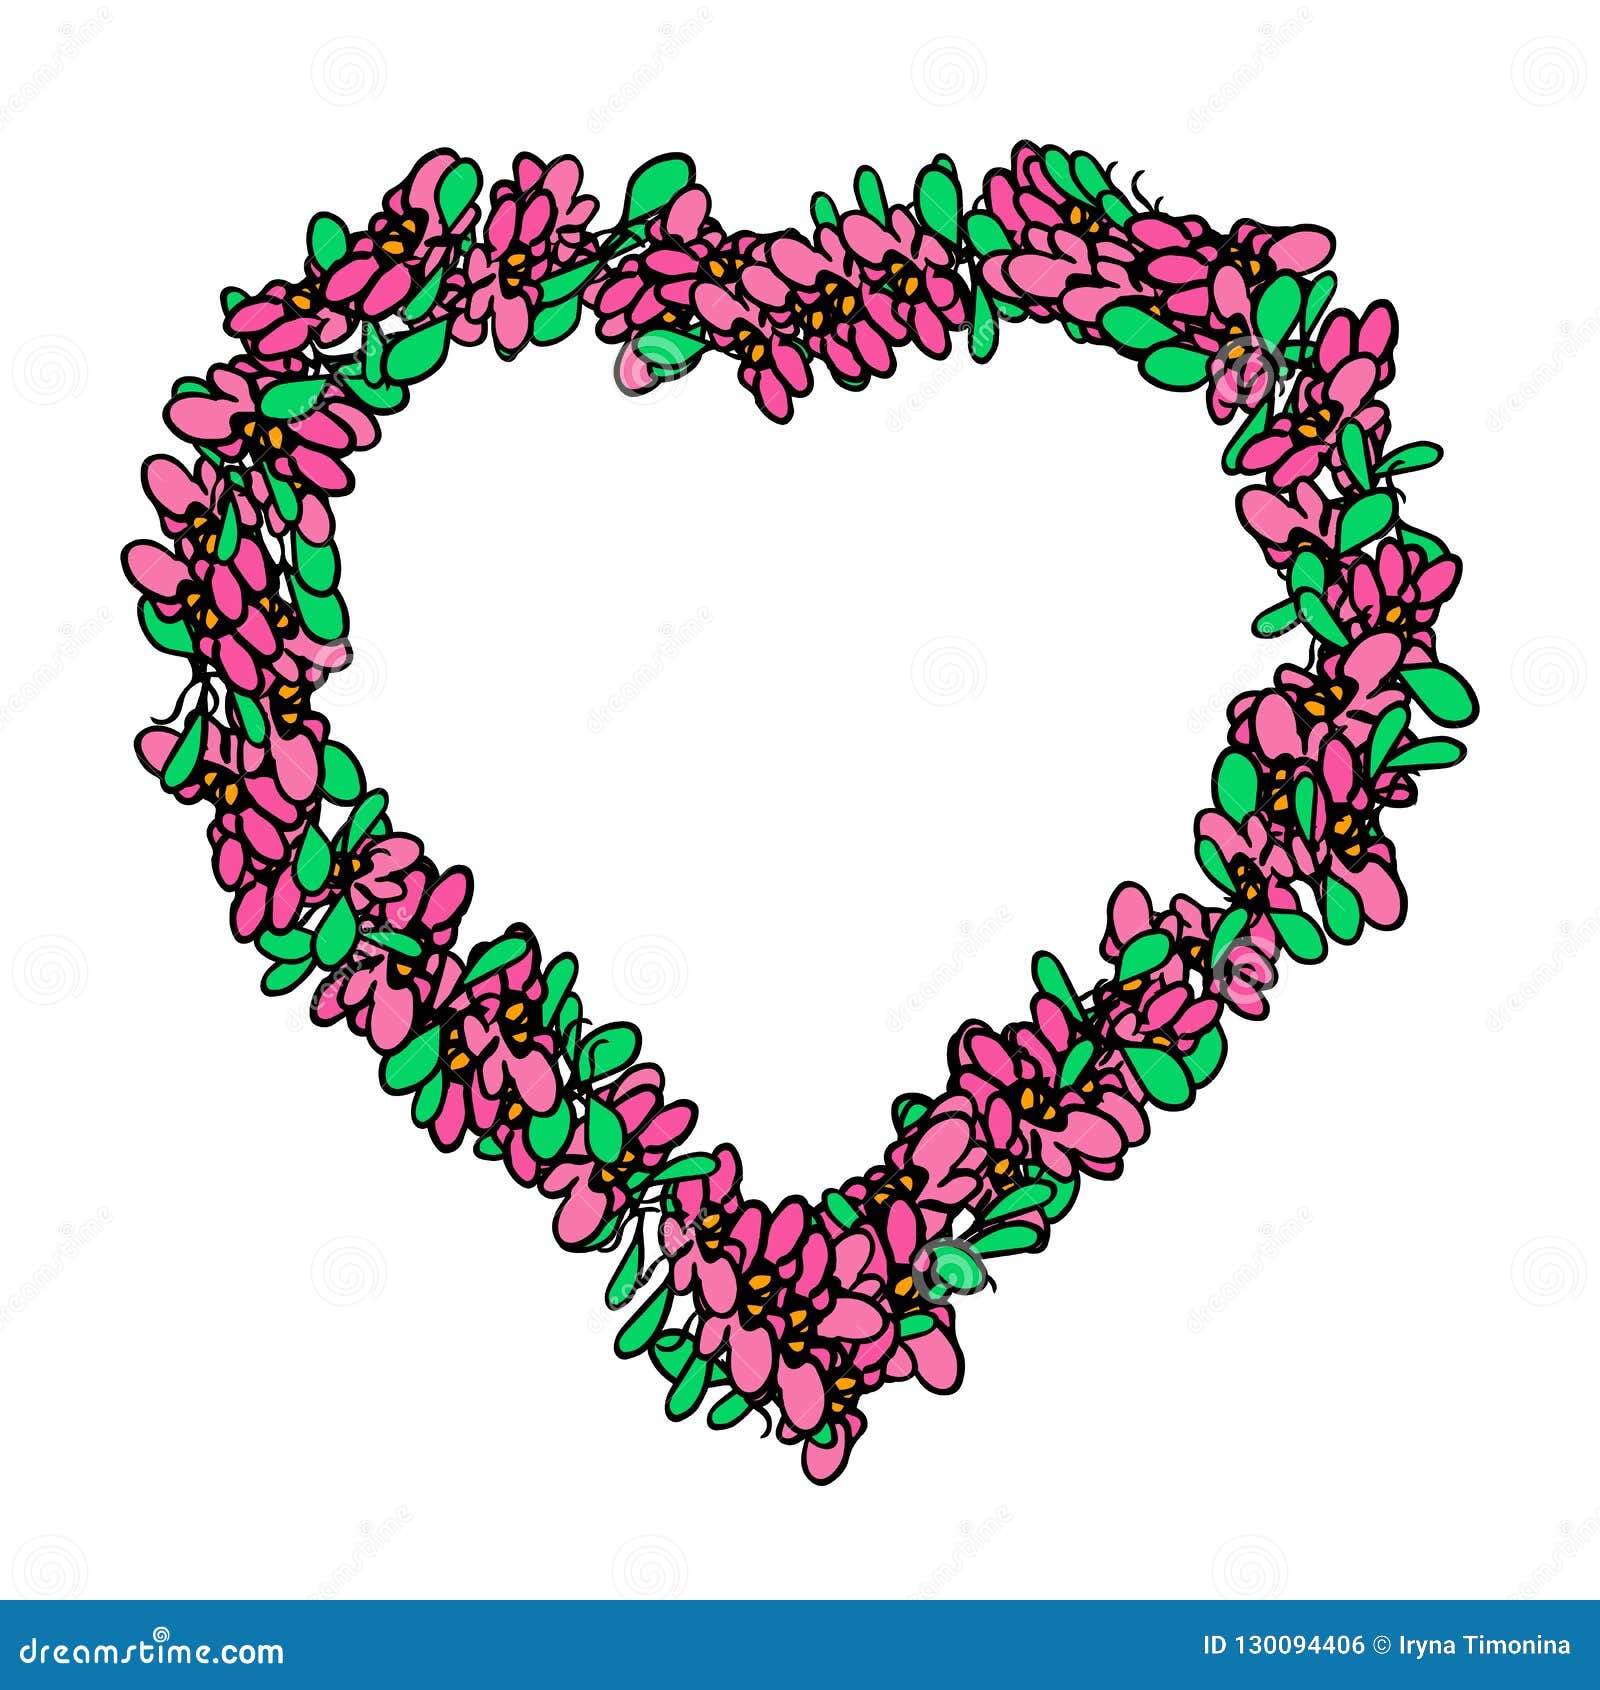 Download Decorative Heart In A Floral Frame. Vector Illustration On An Isolated Background. Stock Vector ...